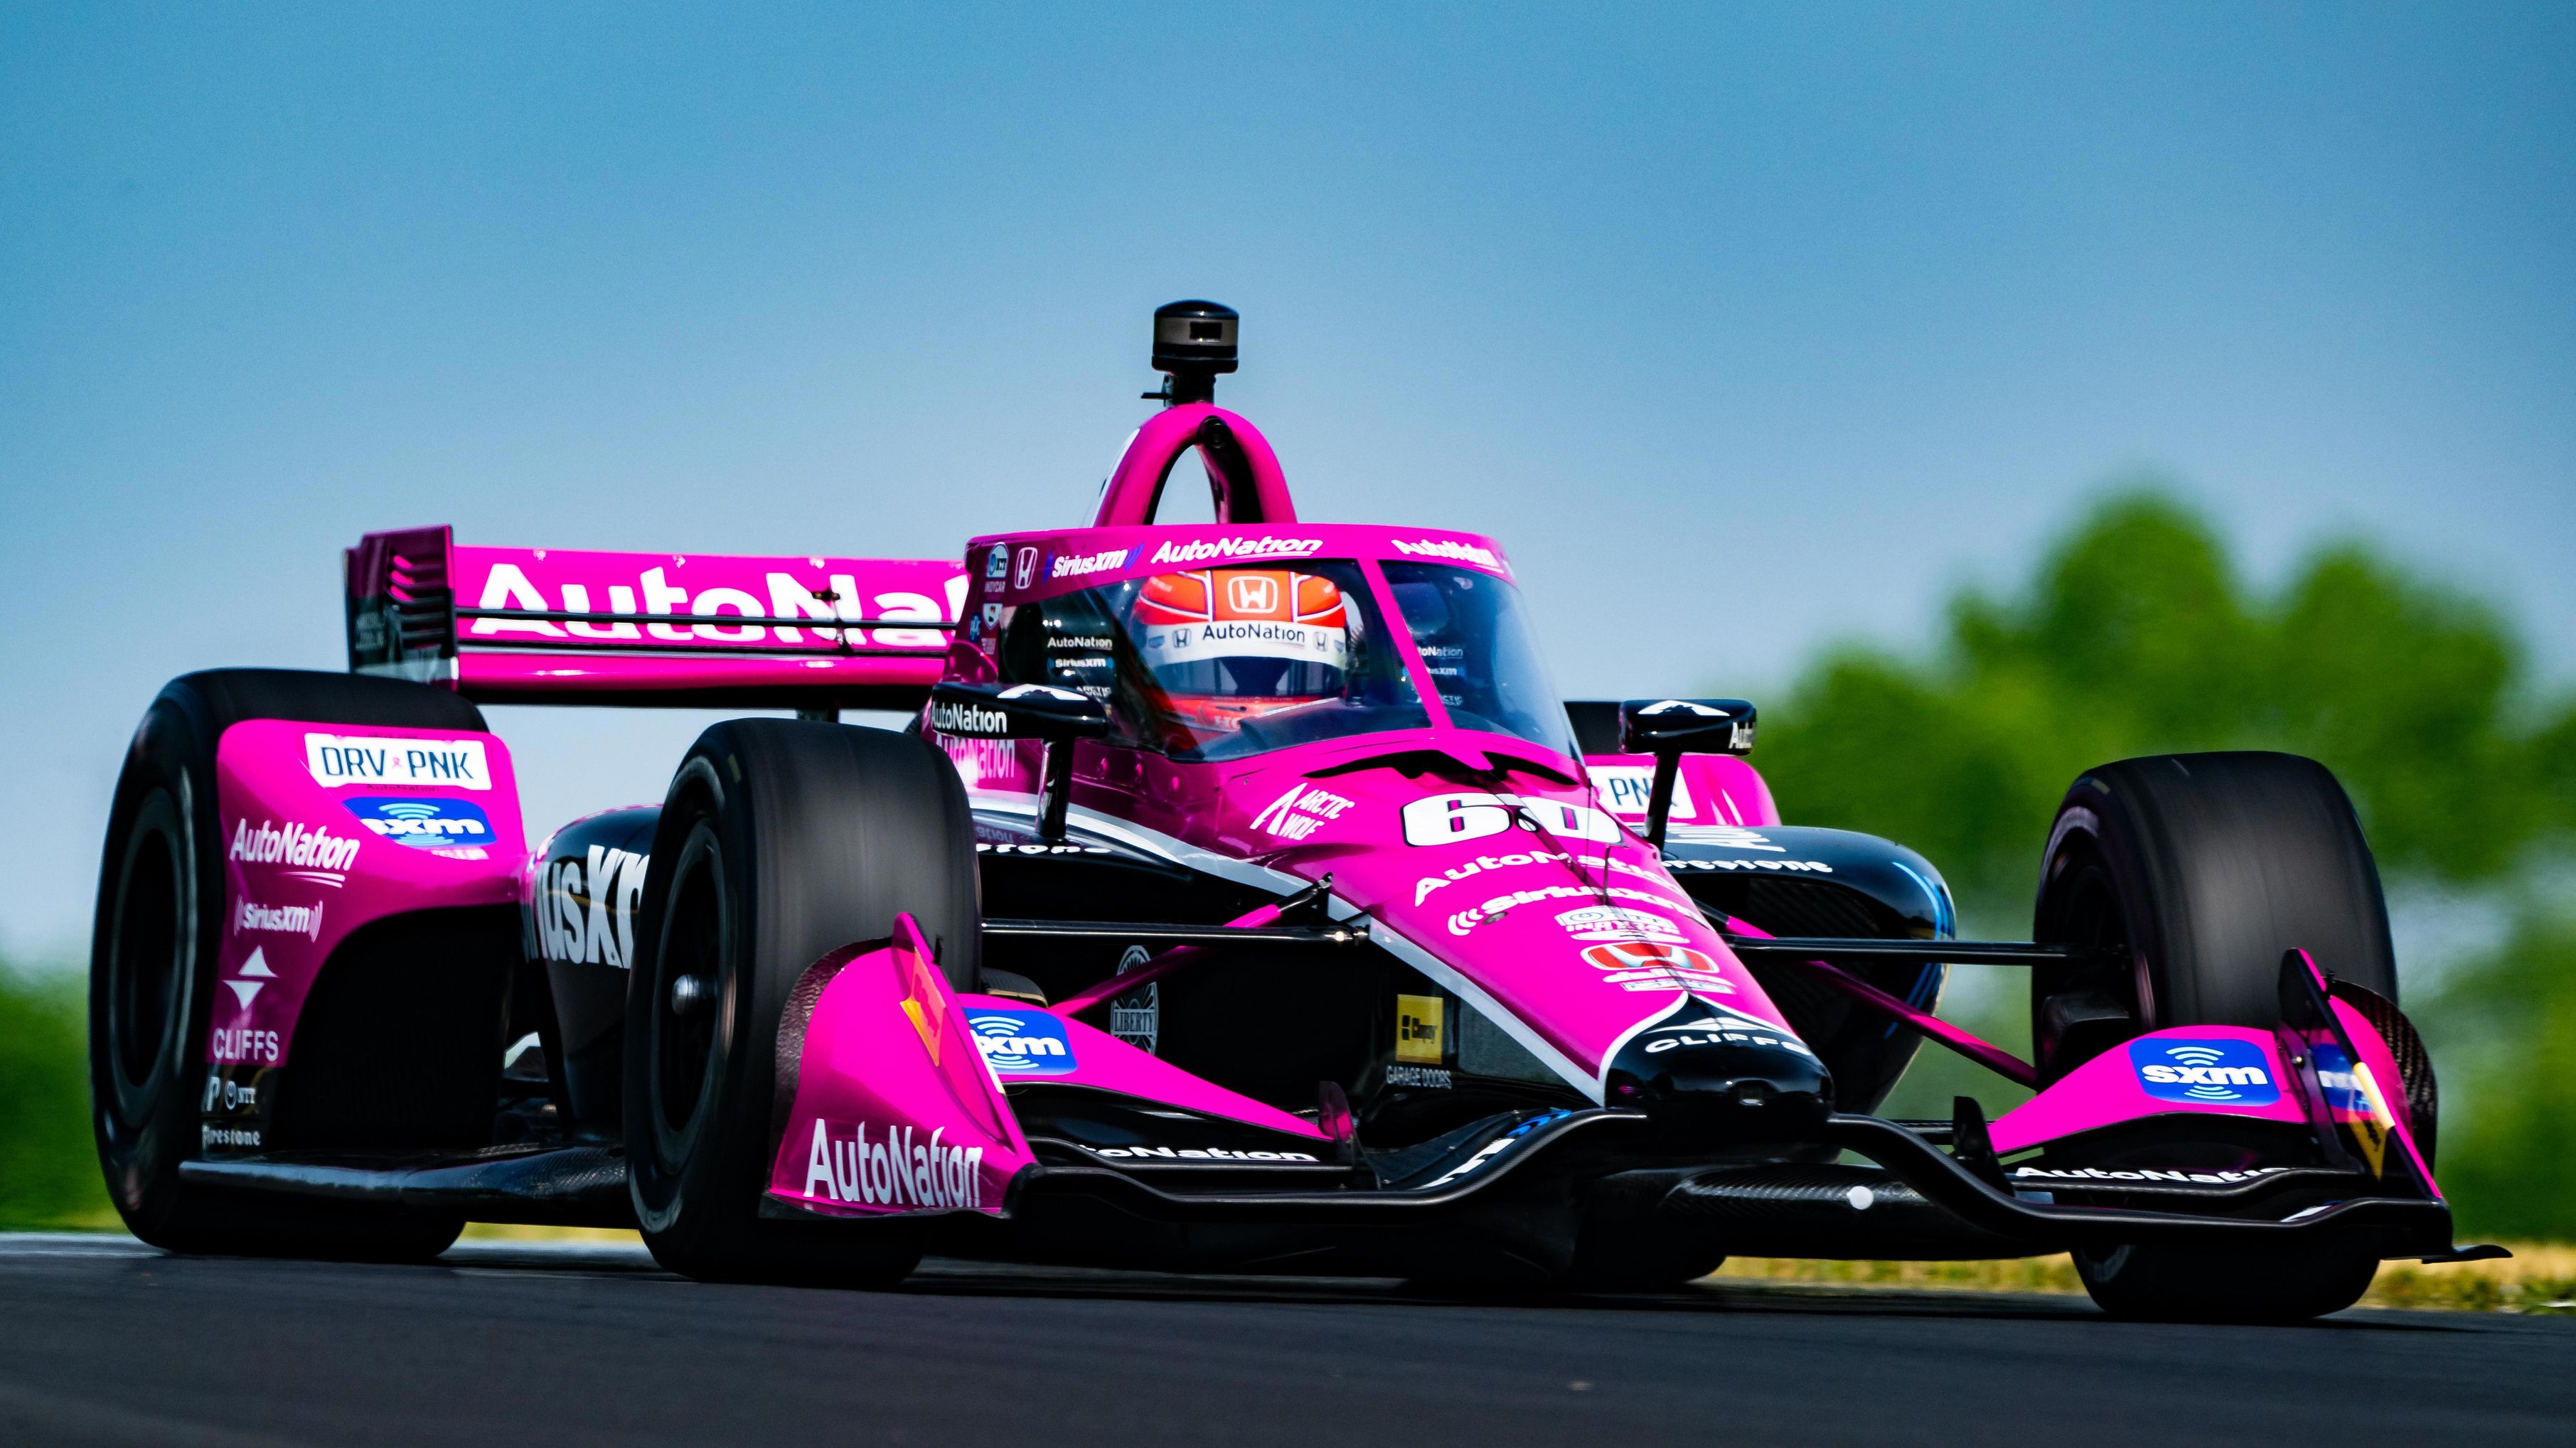 Tom Blomqvist will race the No.60 usually driven by Simon Pagenaud.